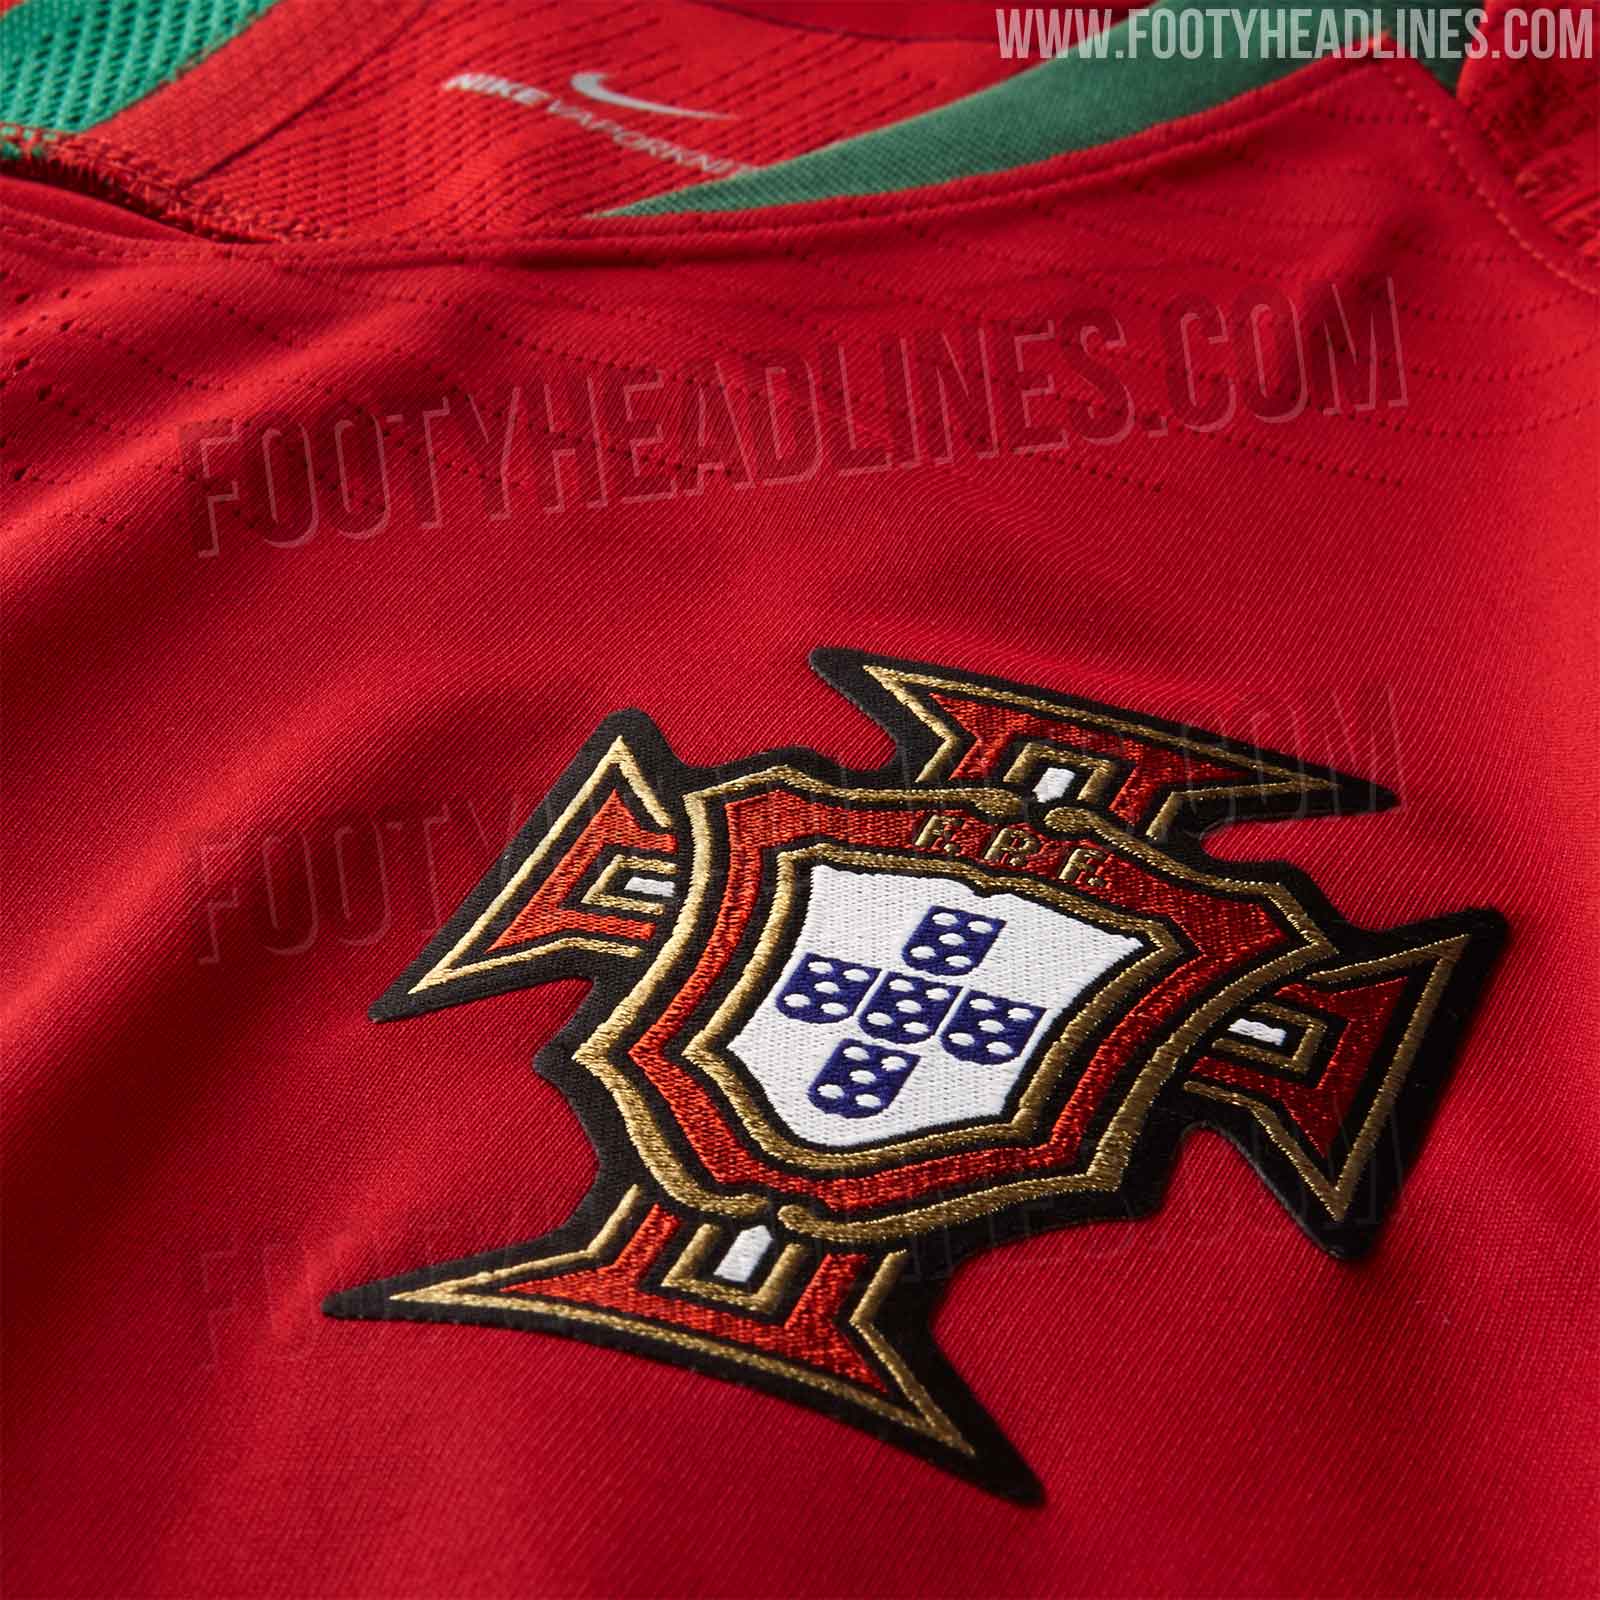 portugal-2018-world-cup-home-kit-4.jpg